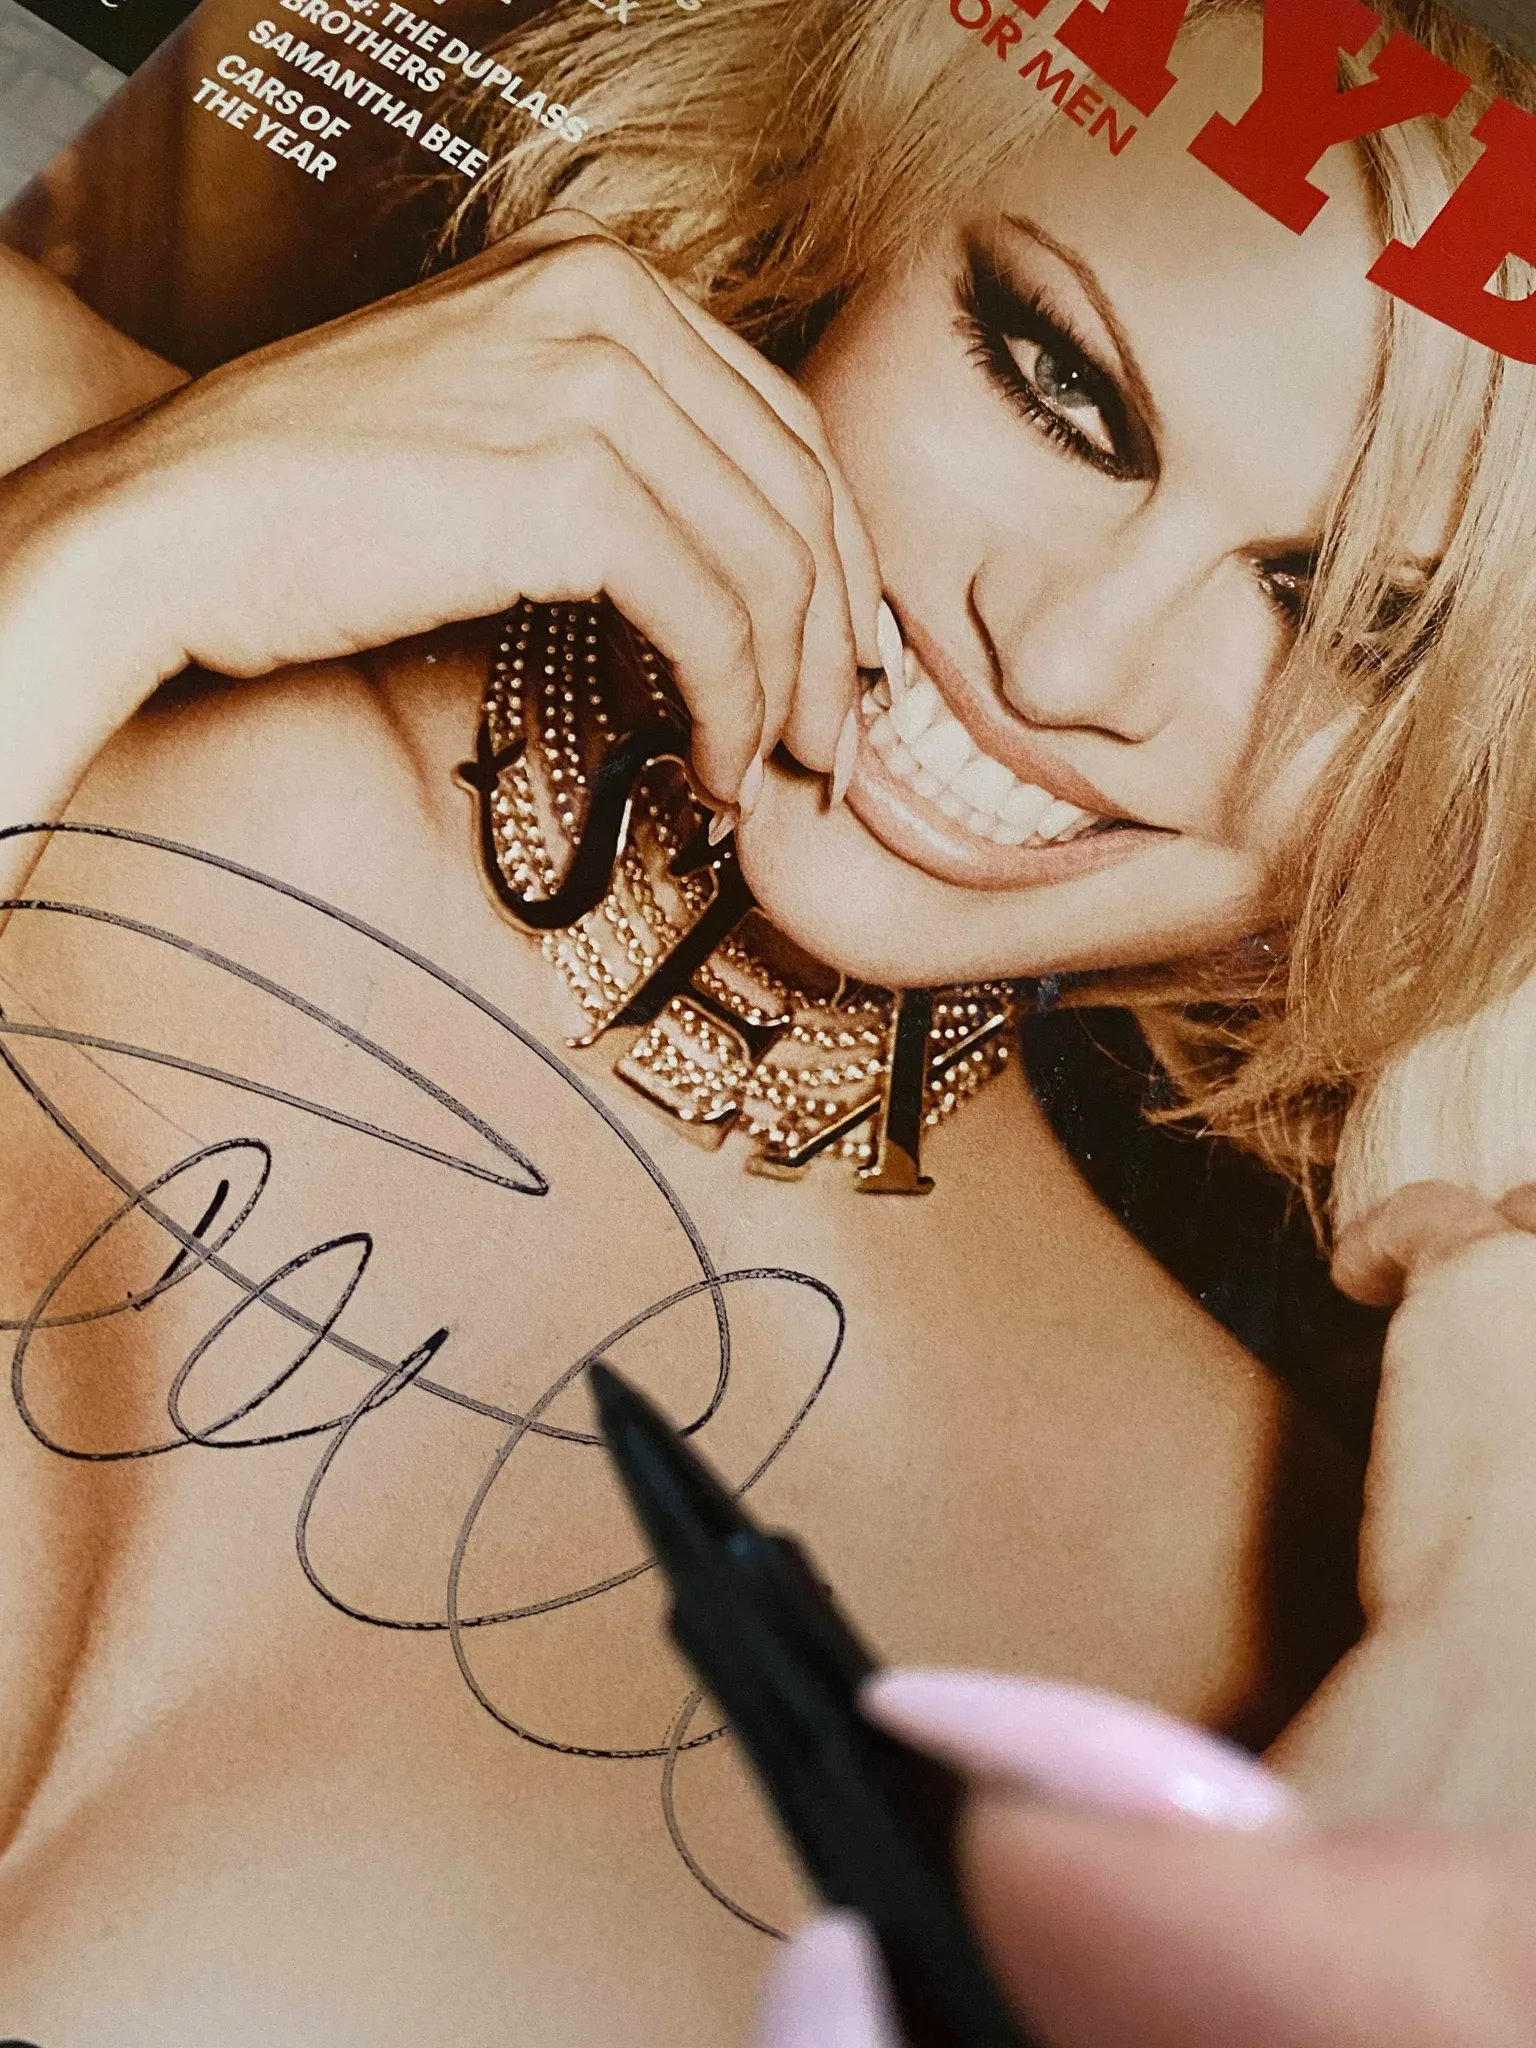 Pamela Anderson signs PlayBoy covers